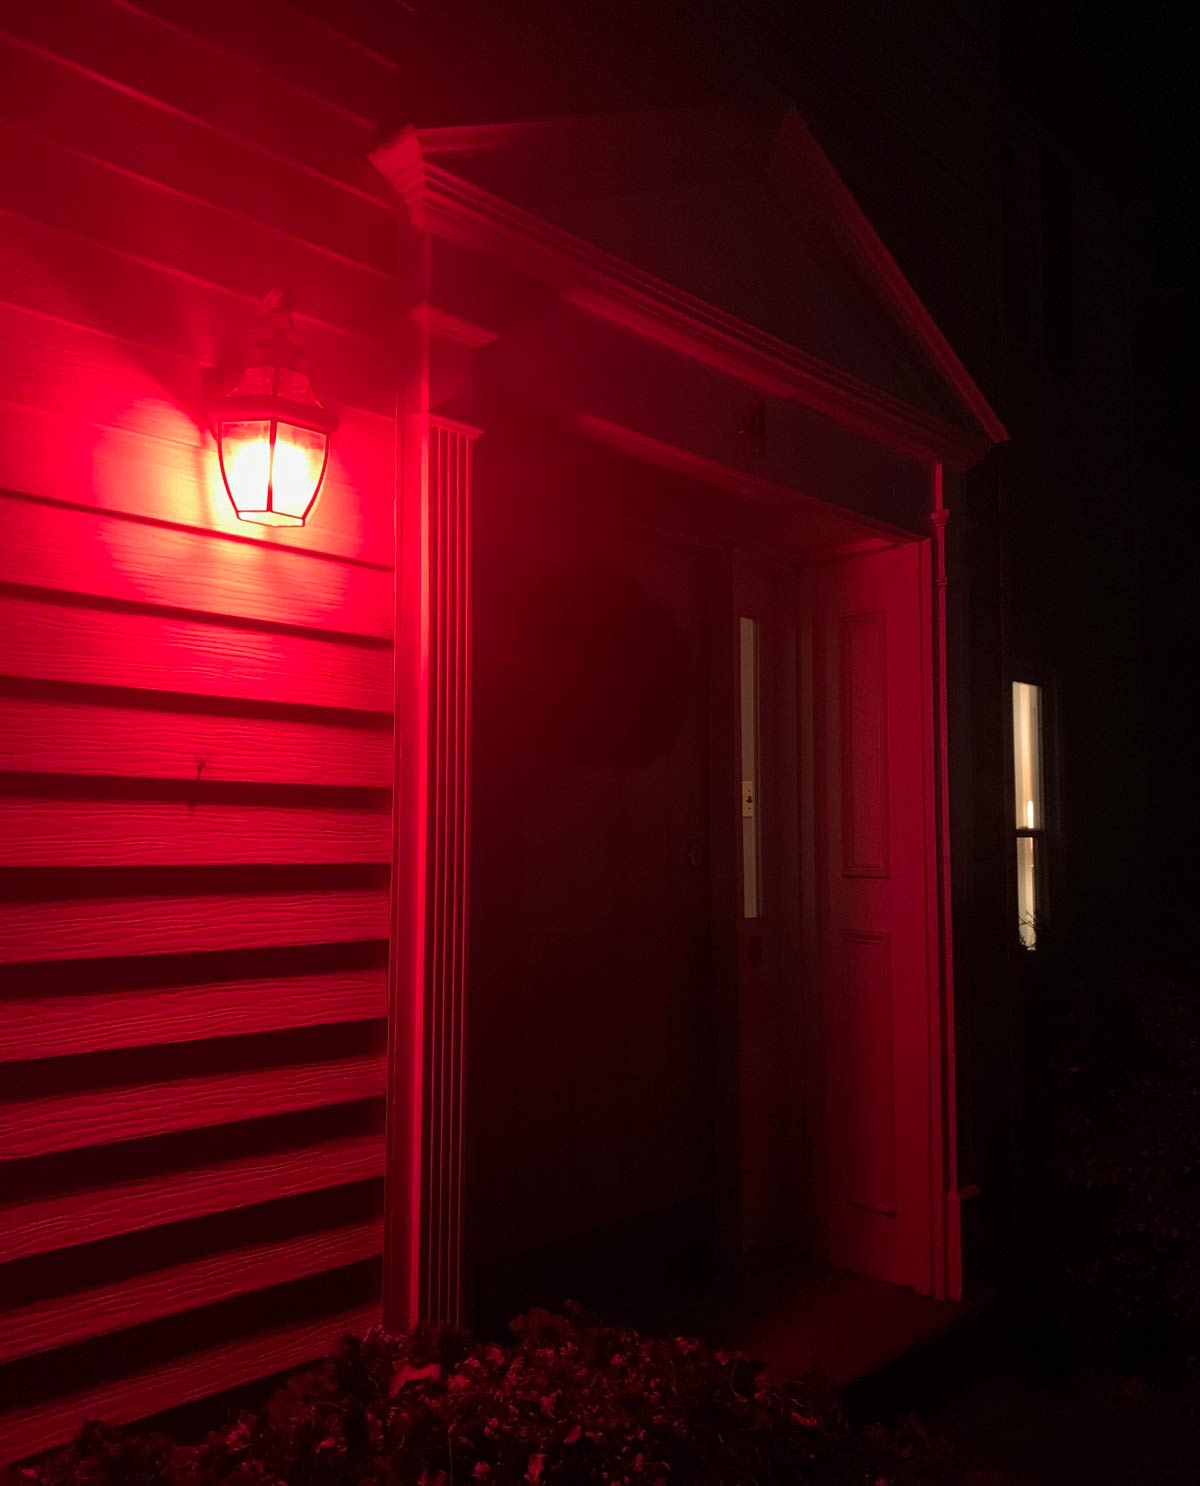 Wife wanted holiday-colored porch lights. She’s not loving her new name - Roxanne